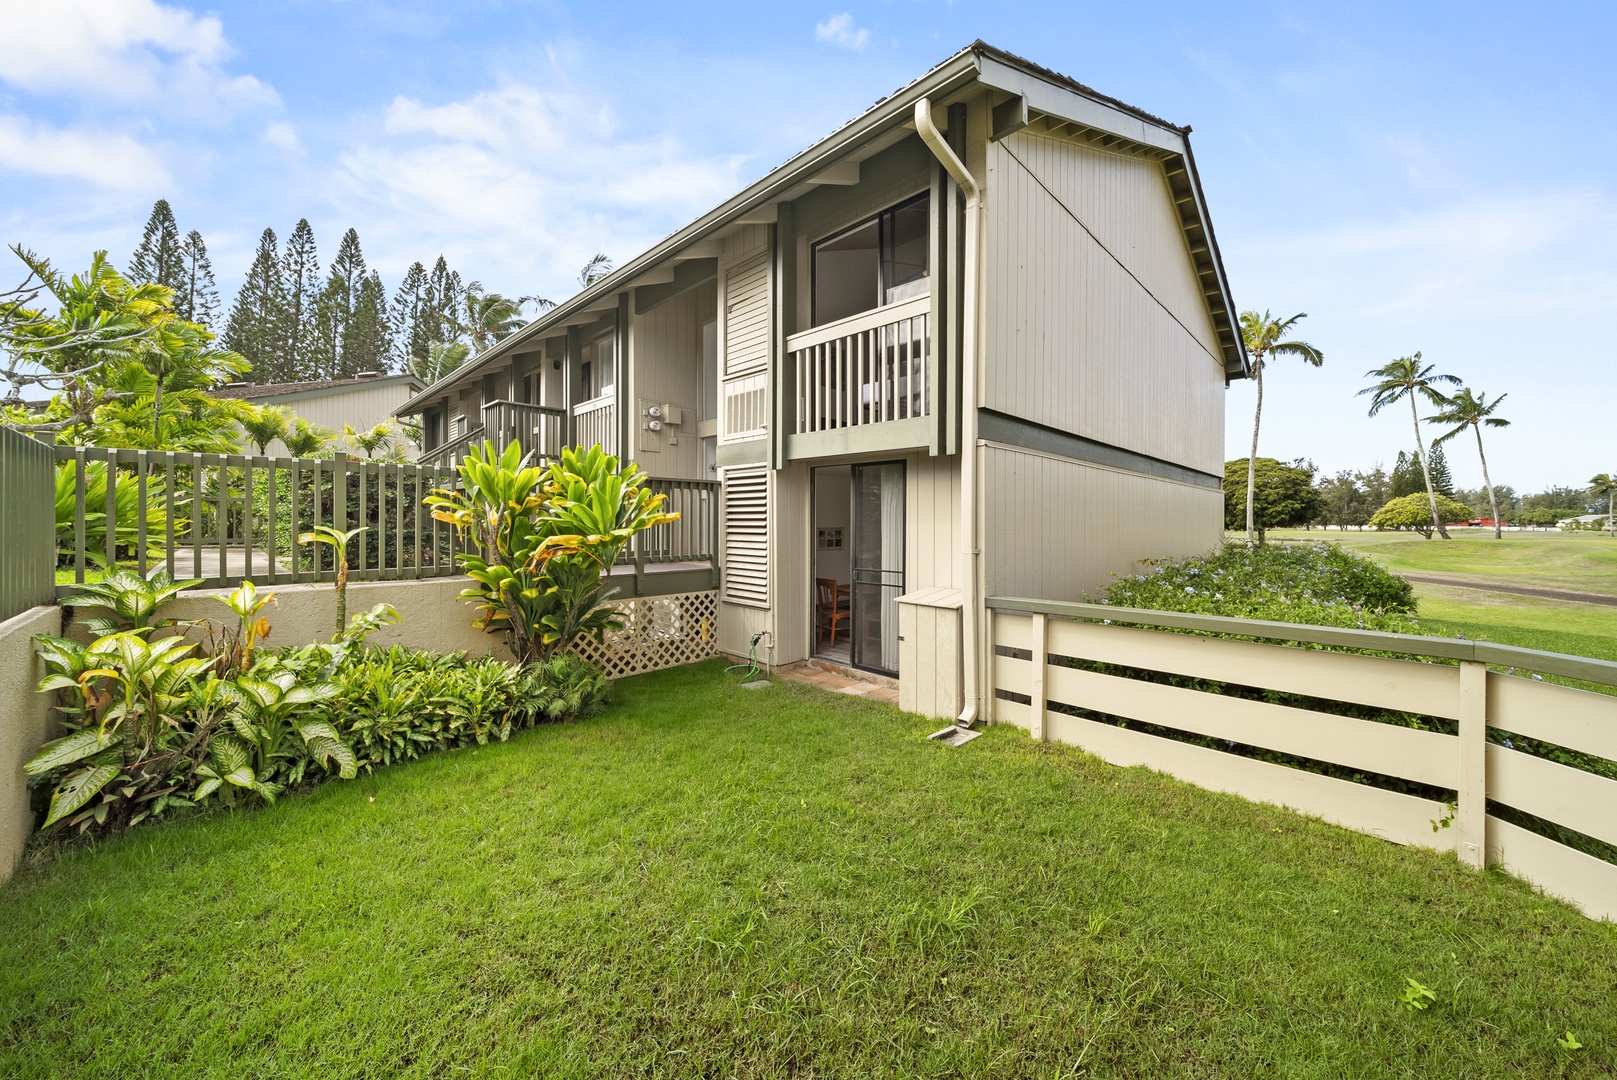 Kahuku Vacation Rentals, Kuilima Estates West #85 - Welcome home!